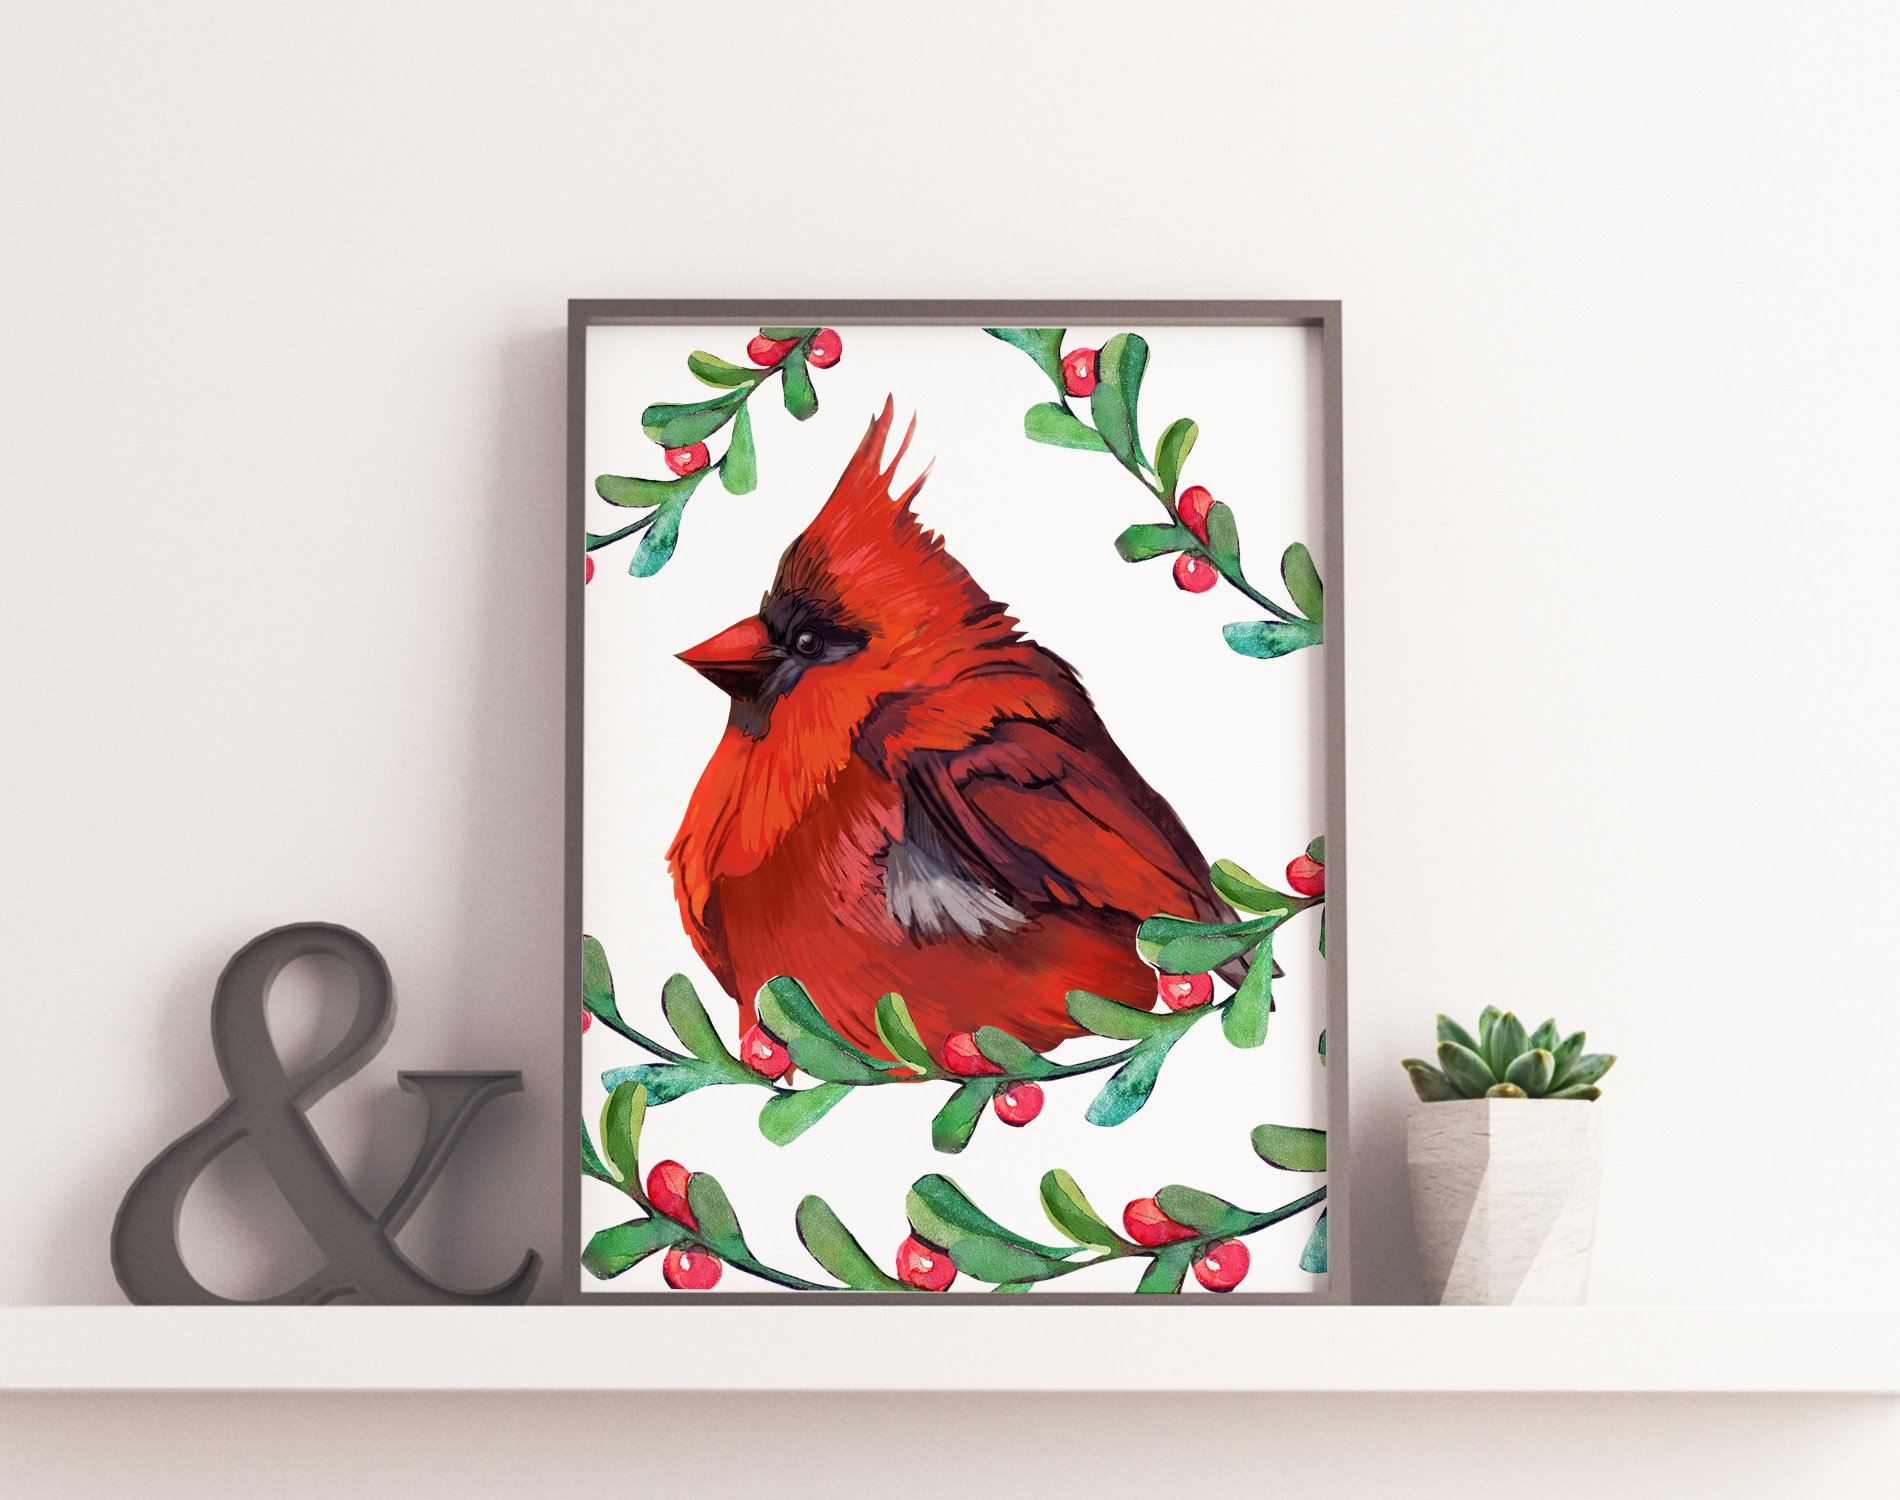 Colorful poster with a red bird.